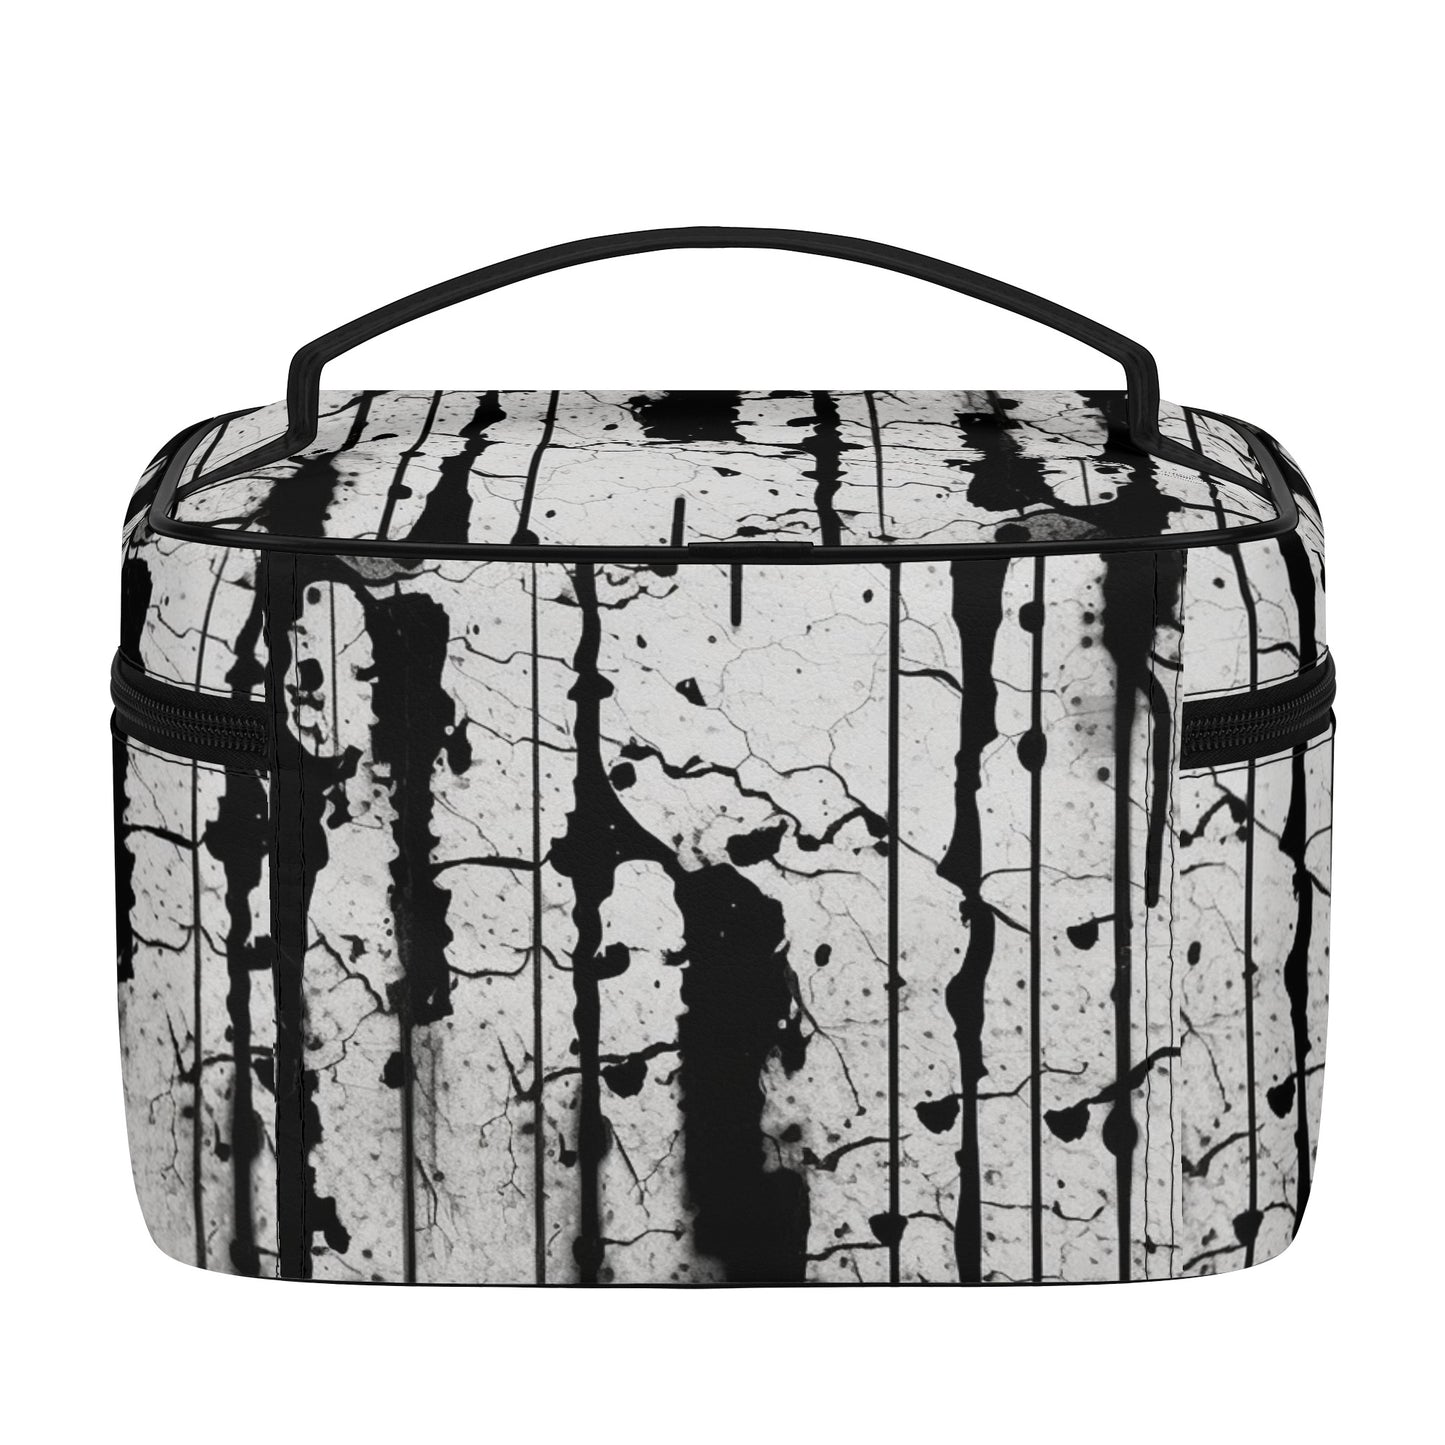 Dripping Black Leather Cosmetic Bag